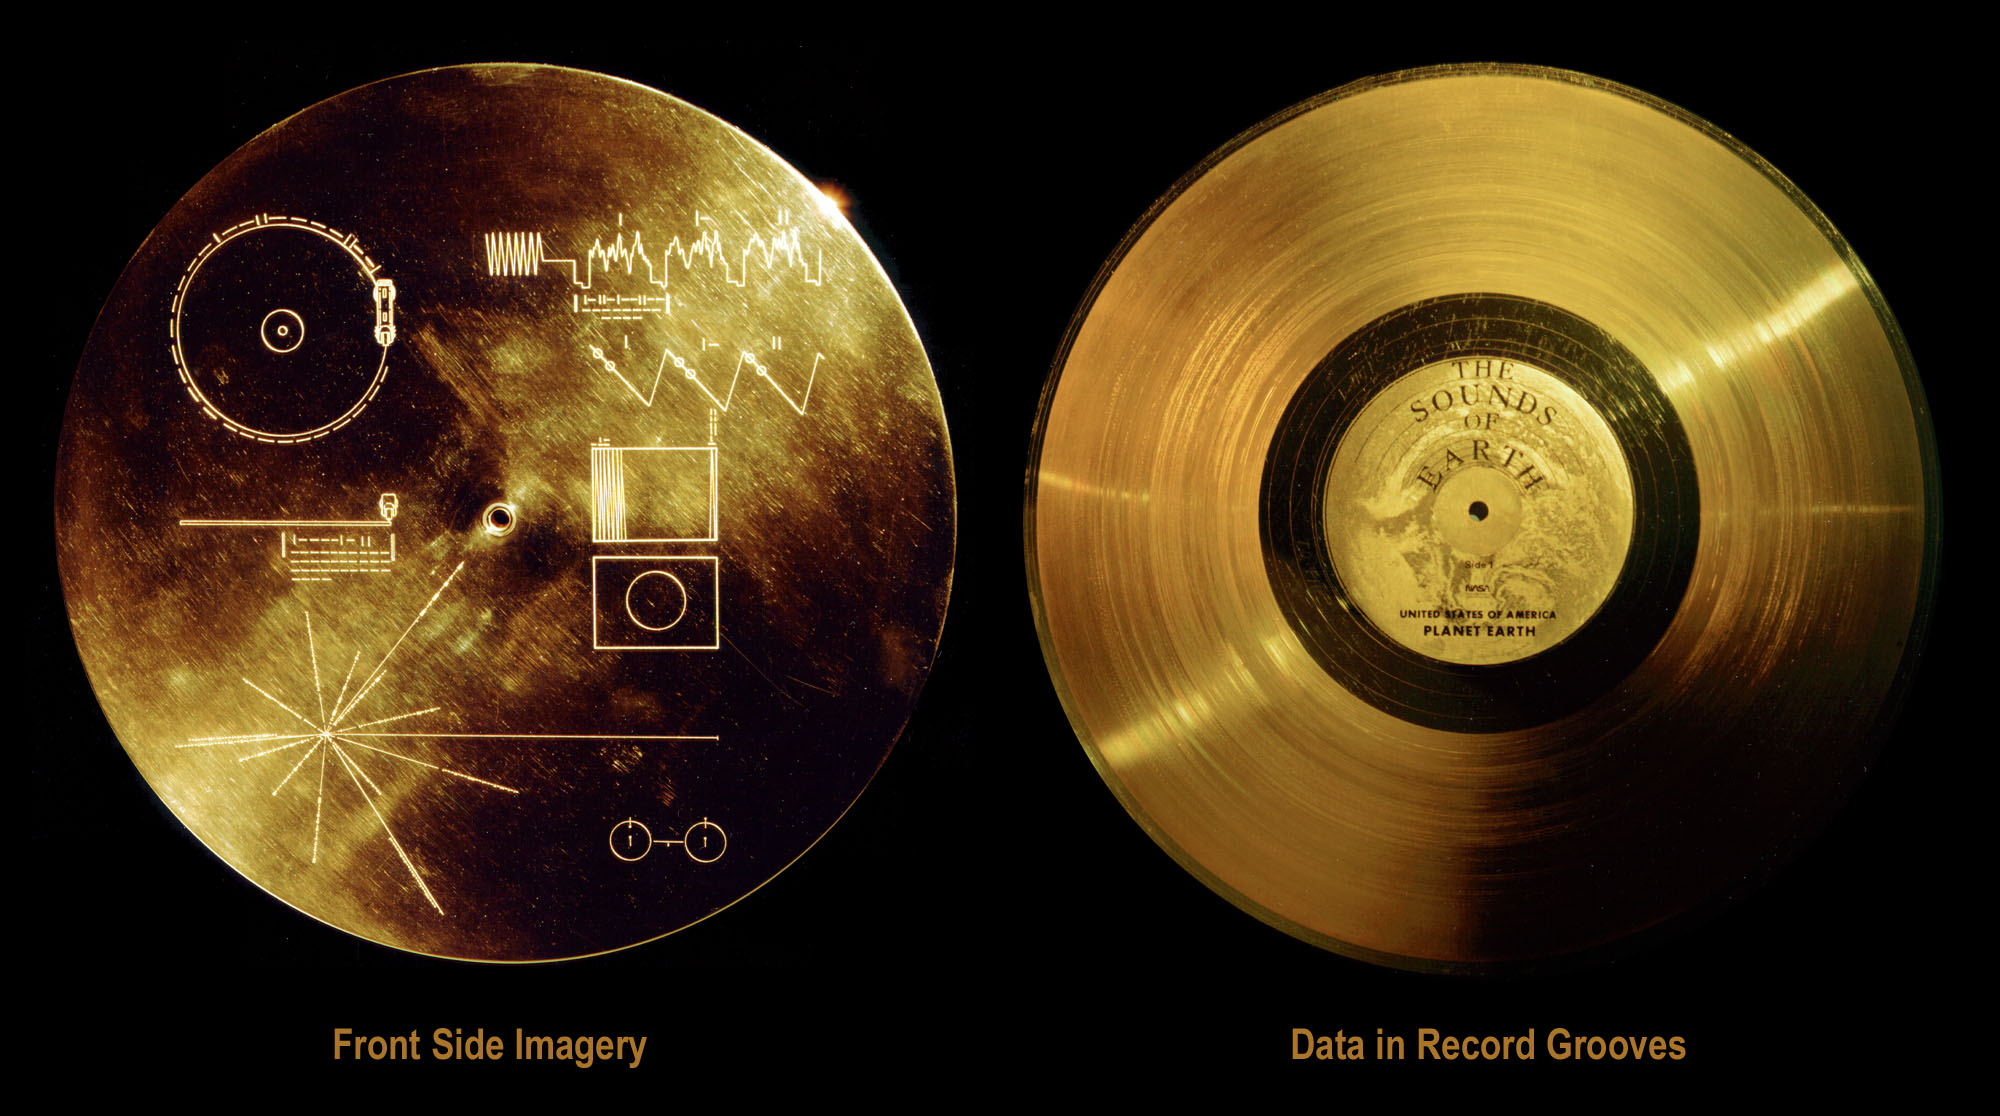 Voyagers-Golden-Record-1977